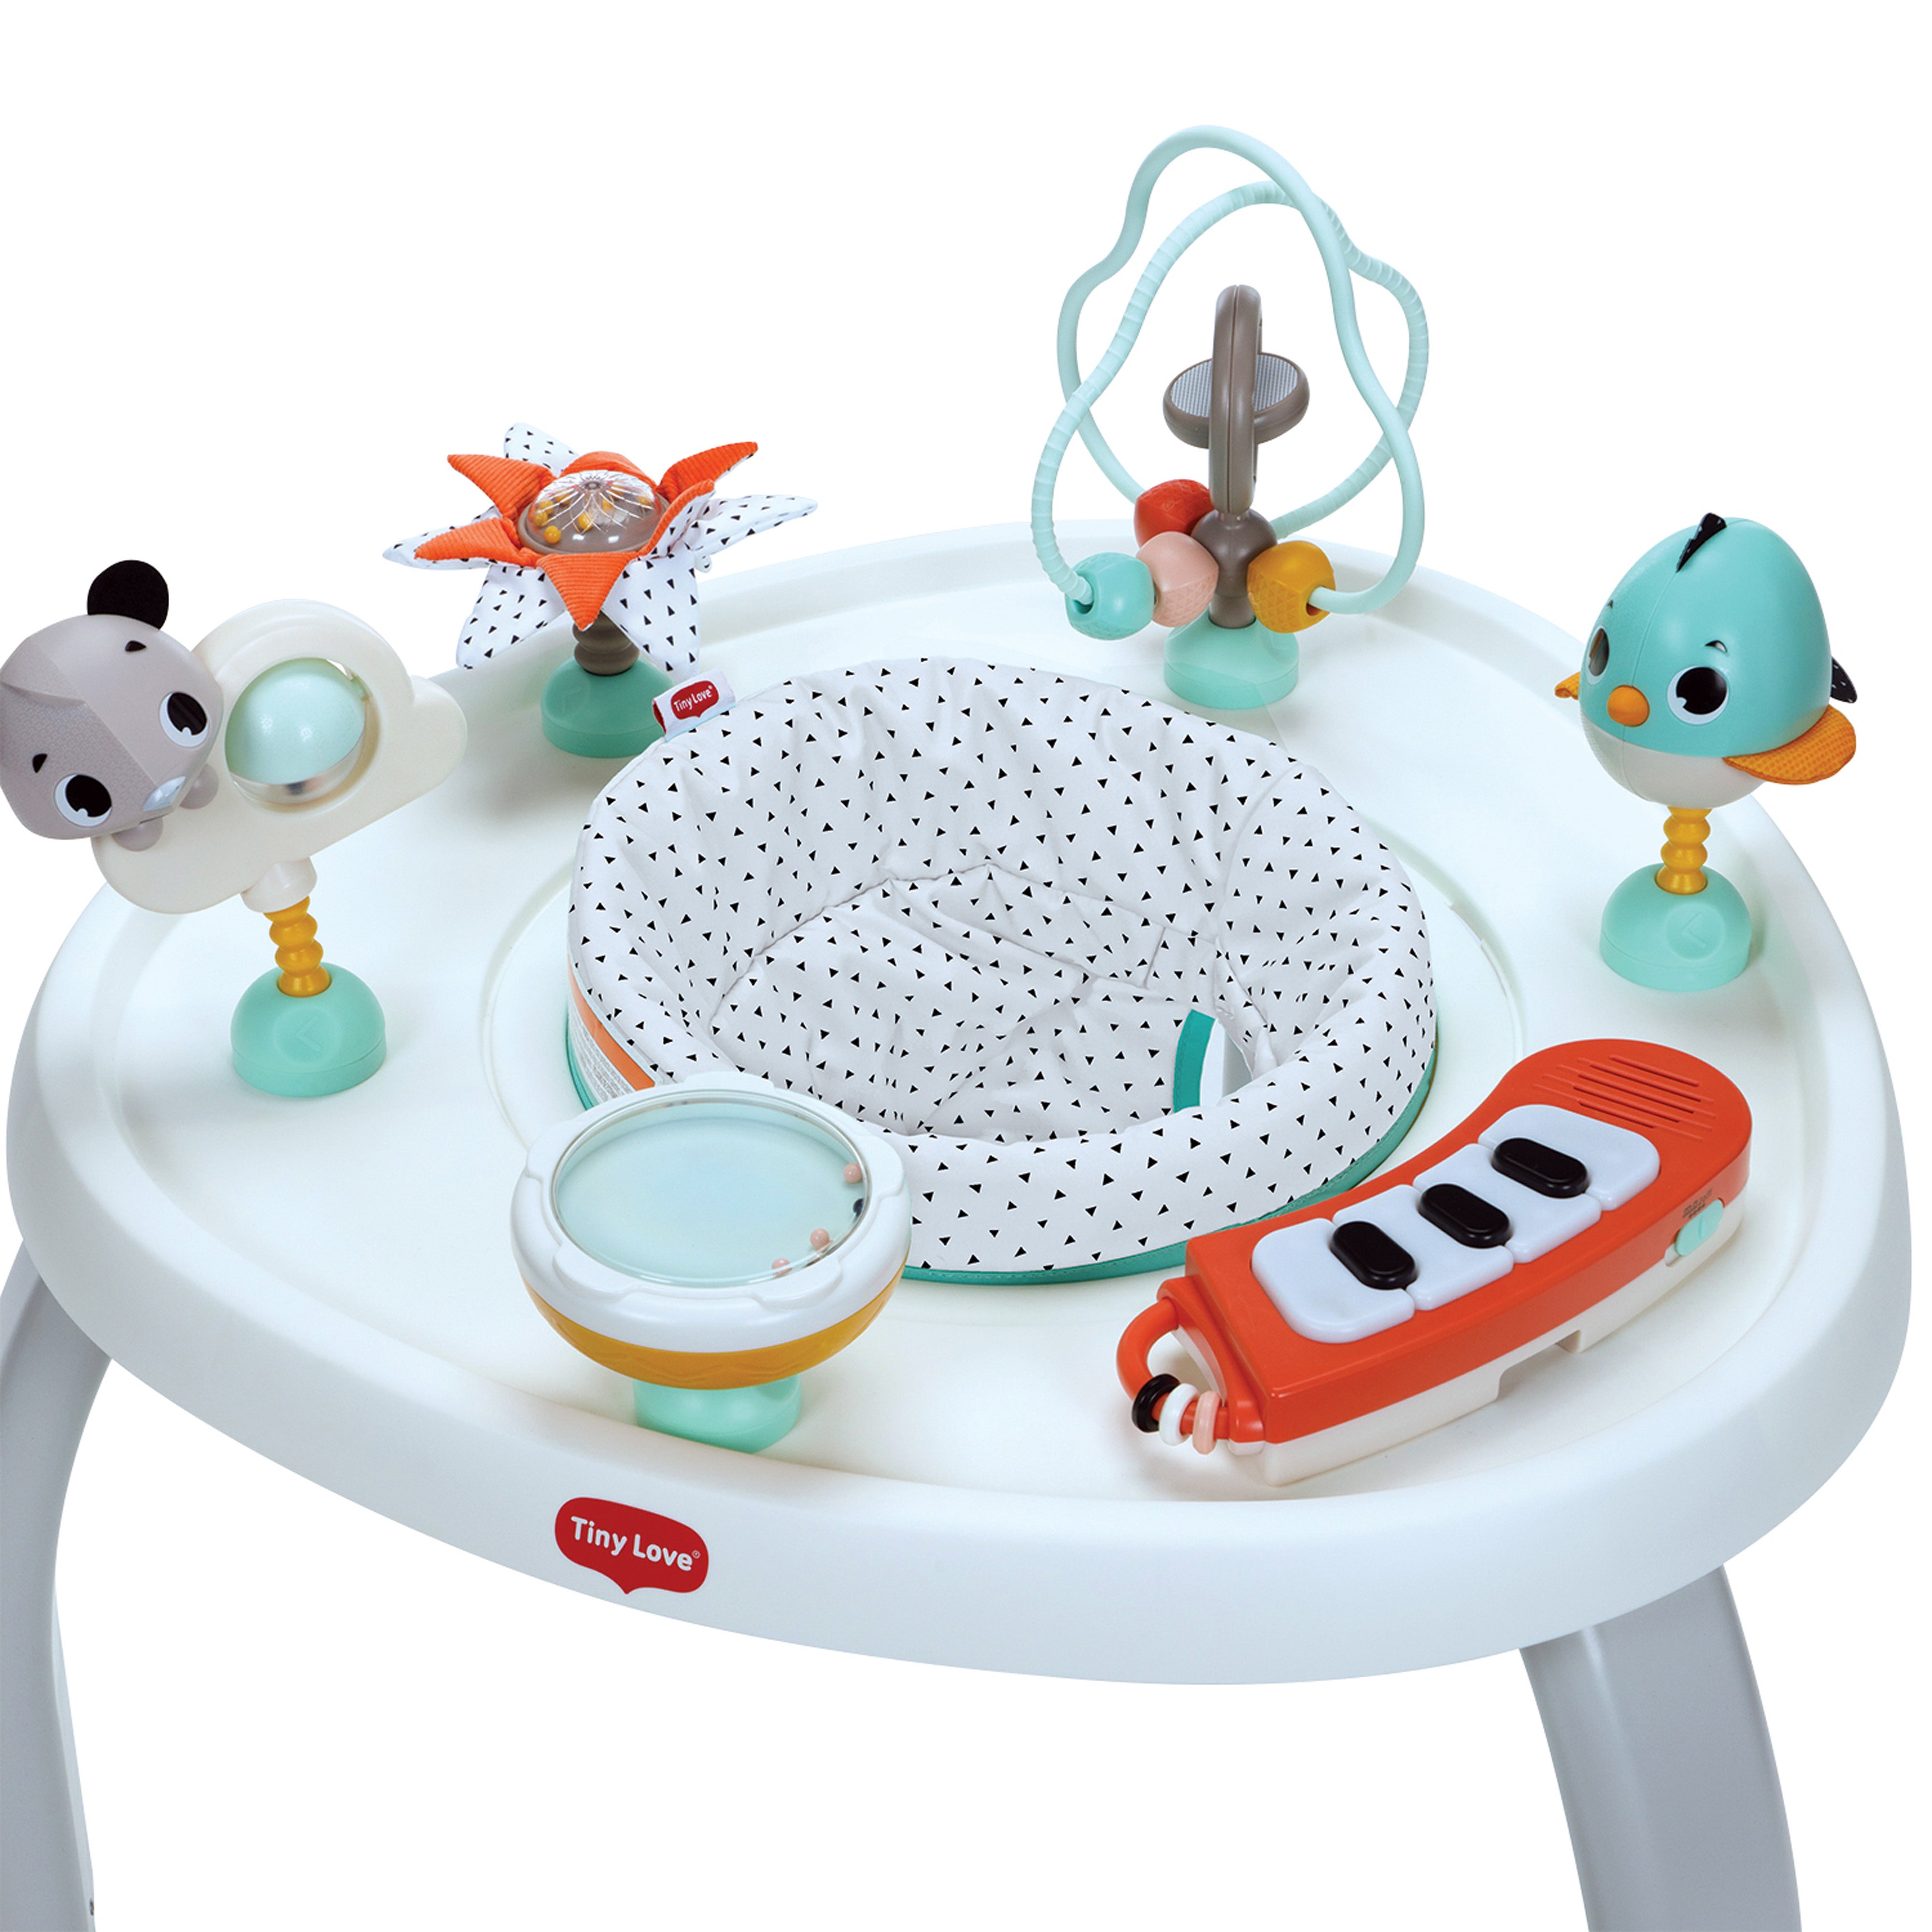 Tiny Love 4-in-1 Here I Grow Mobile Activity Center, Magical Tales